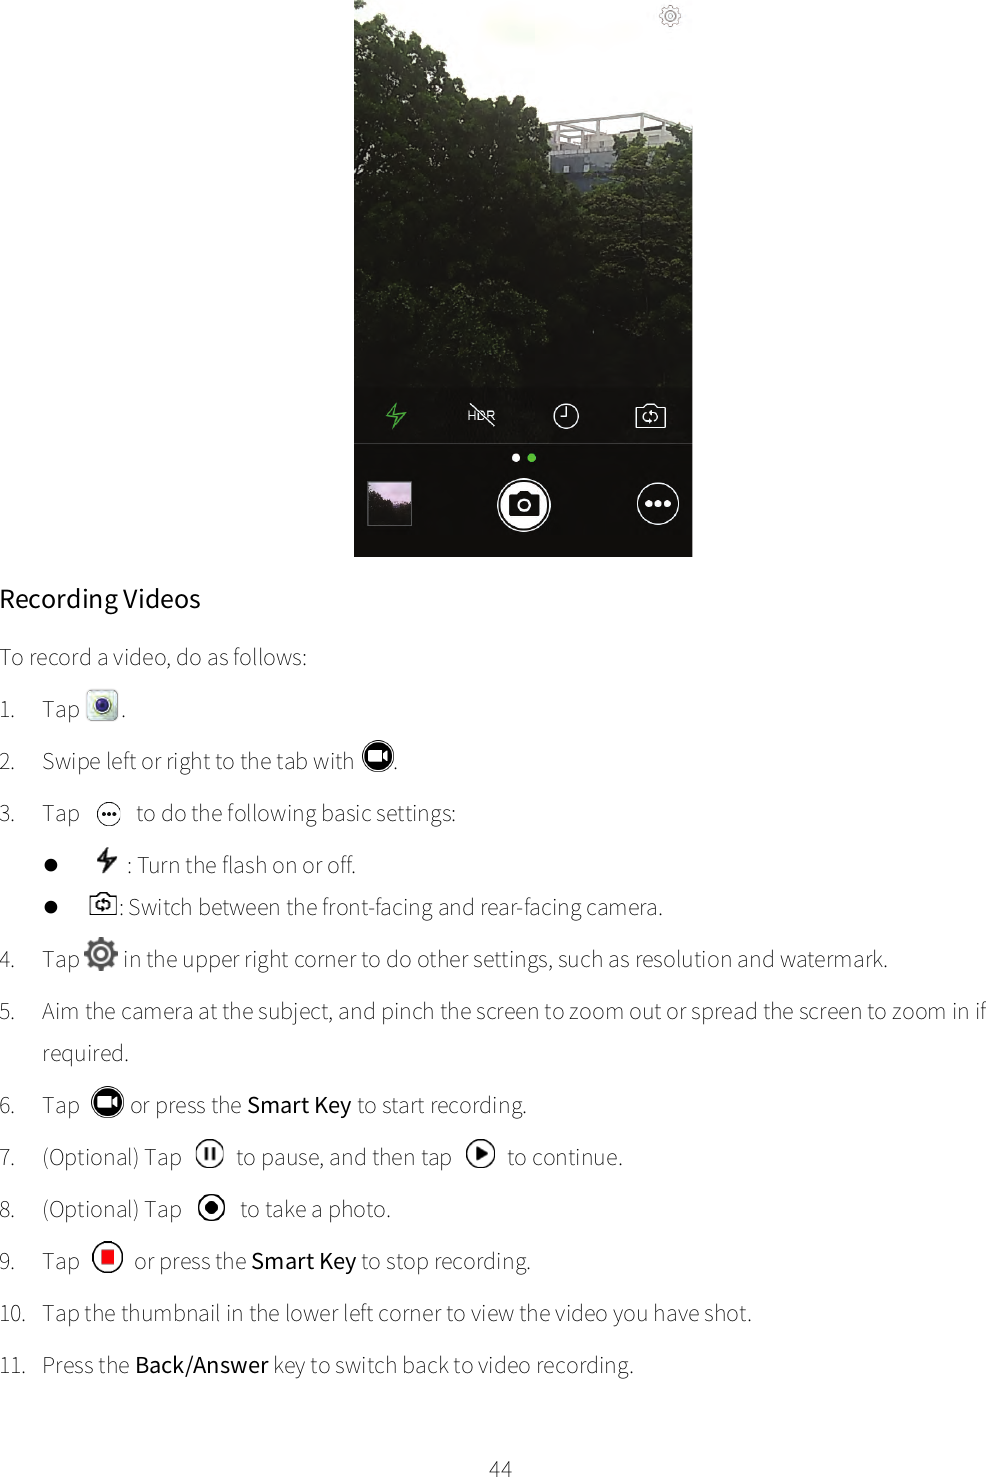    44  Recording Videos To record a video, do as follows: 1. Tap  . 2. Swipe left or right to the tab with  . 3. Tap   to do the following basic settings:  : Turn the flash on or off.  : Switch between the front-facing and rear-facing camera. 4. Tap  in the upper right corner to do other settings, such as resolution and watermark. 5. Aim the camera at the subject, and pinch the screen to zoom out or spread the screen to zoom in if required. 6. Tap   or press the Smart Key to start recording. 7. (Optional) Tap   to pause, and then tap   to continue. 8. (Optional) Tap  to take a photo. 9. Tap   or press the Smart Key to stop recording. 10. Tap the thumbnail in the lower left corner to view the video you have shot. 11. Press the Back/Answer key to switch back to video recording. 